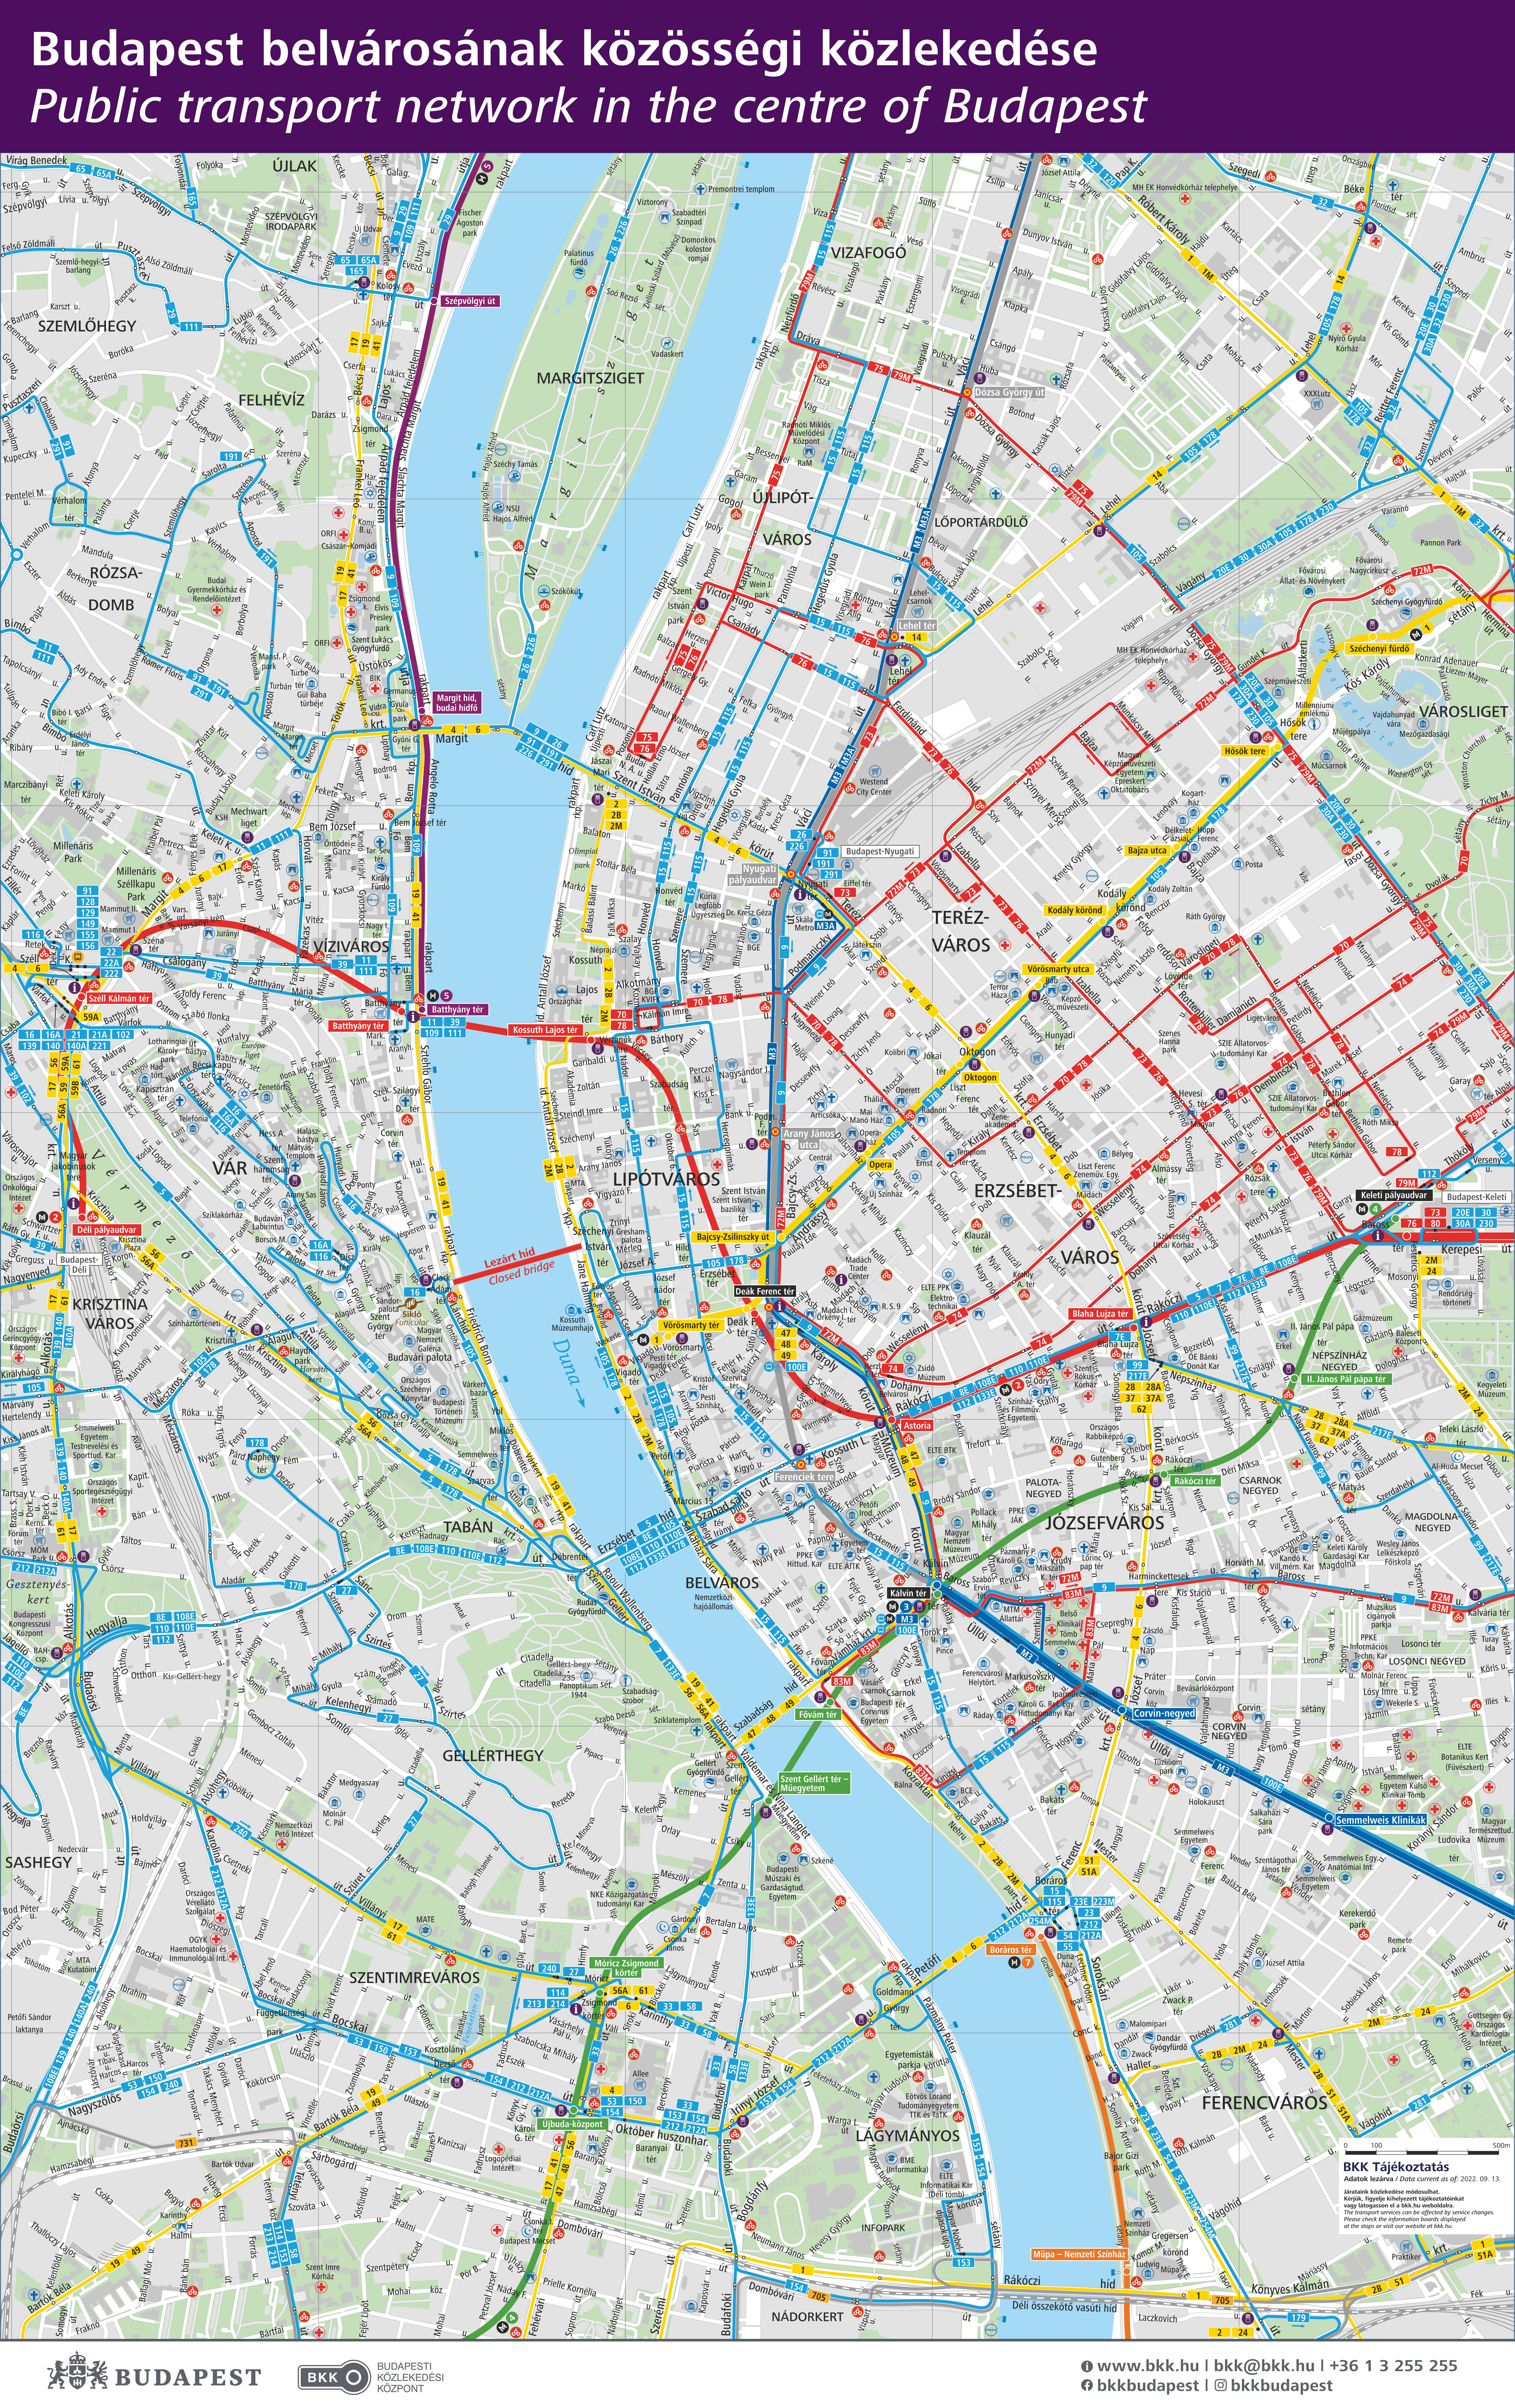 Public transport network in the centre of Budapest